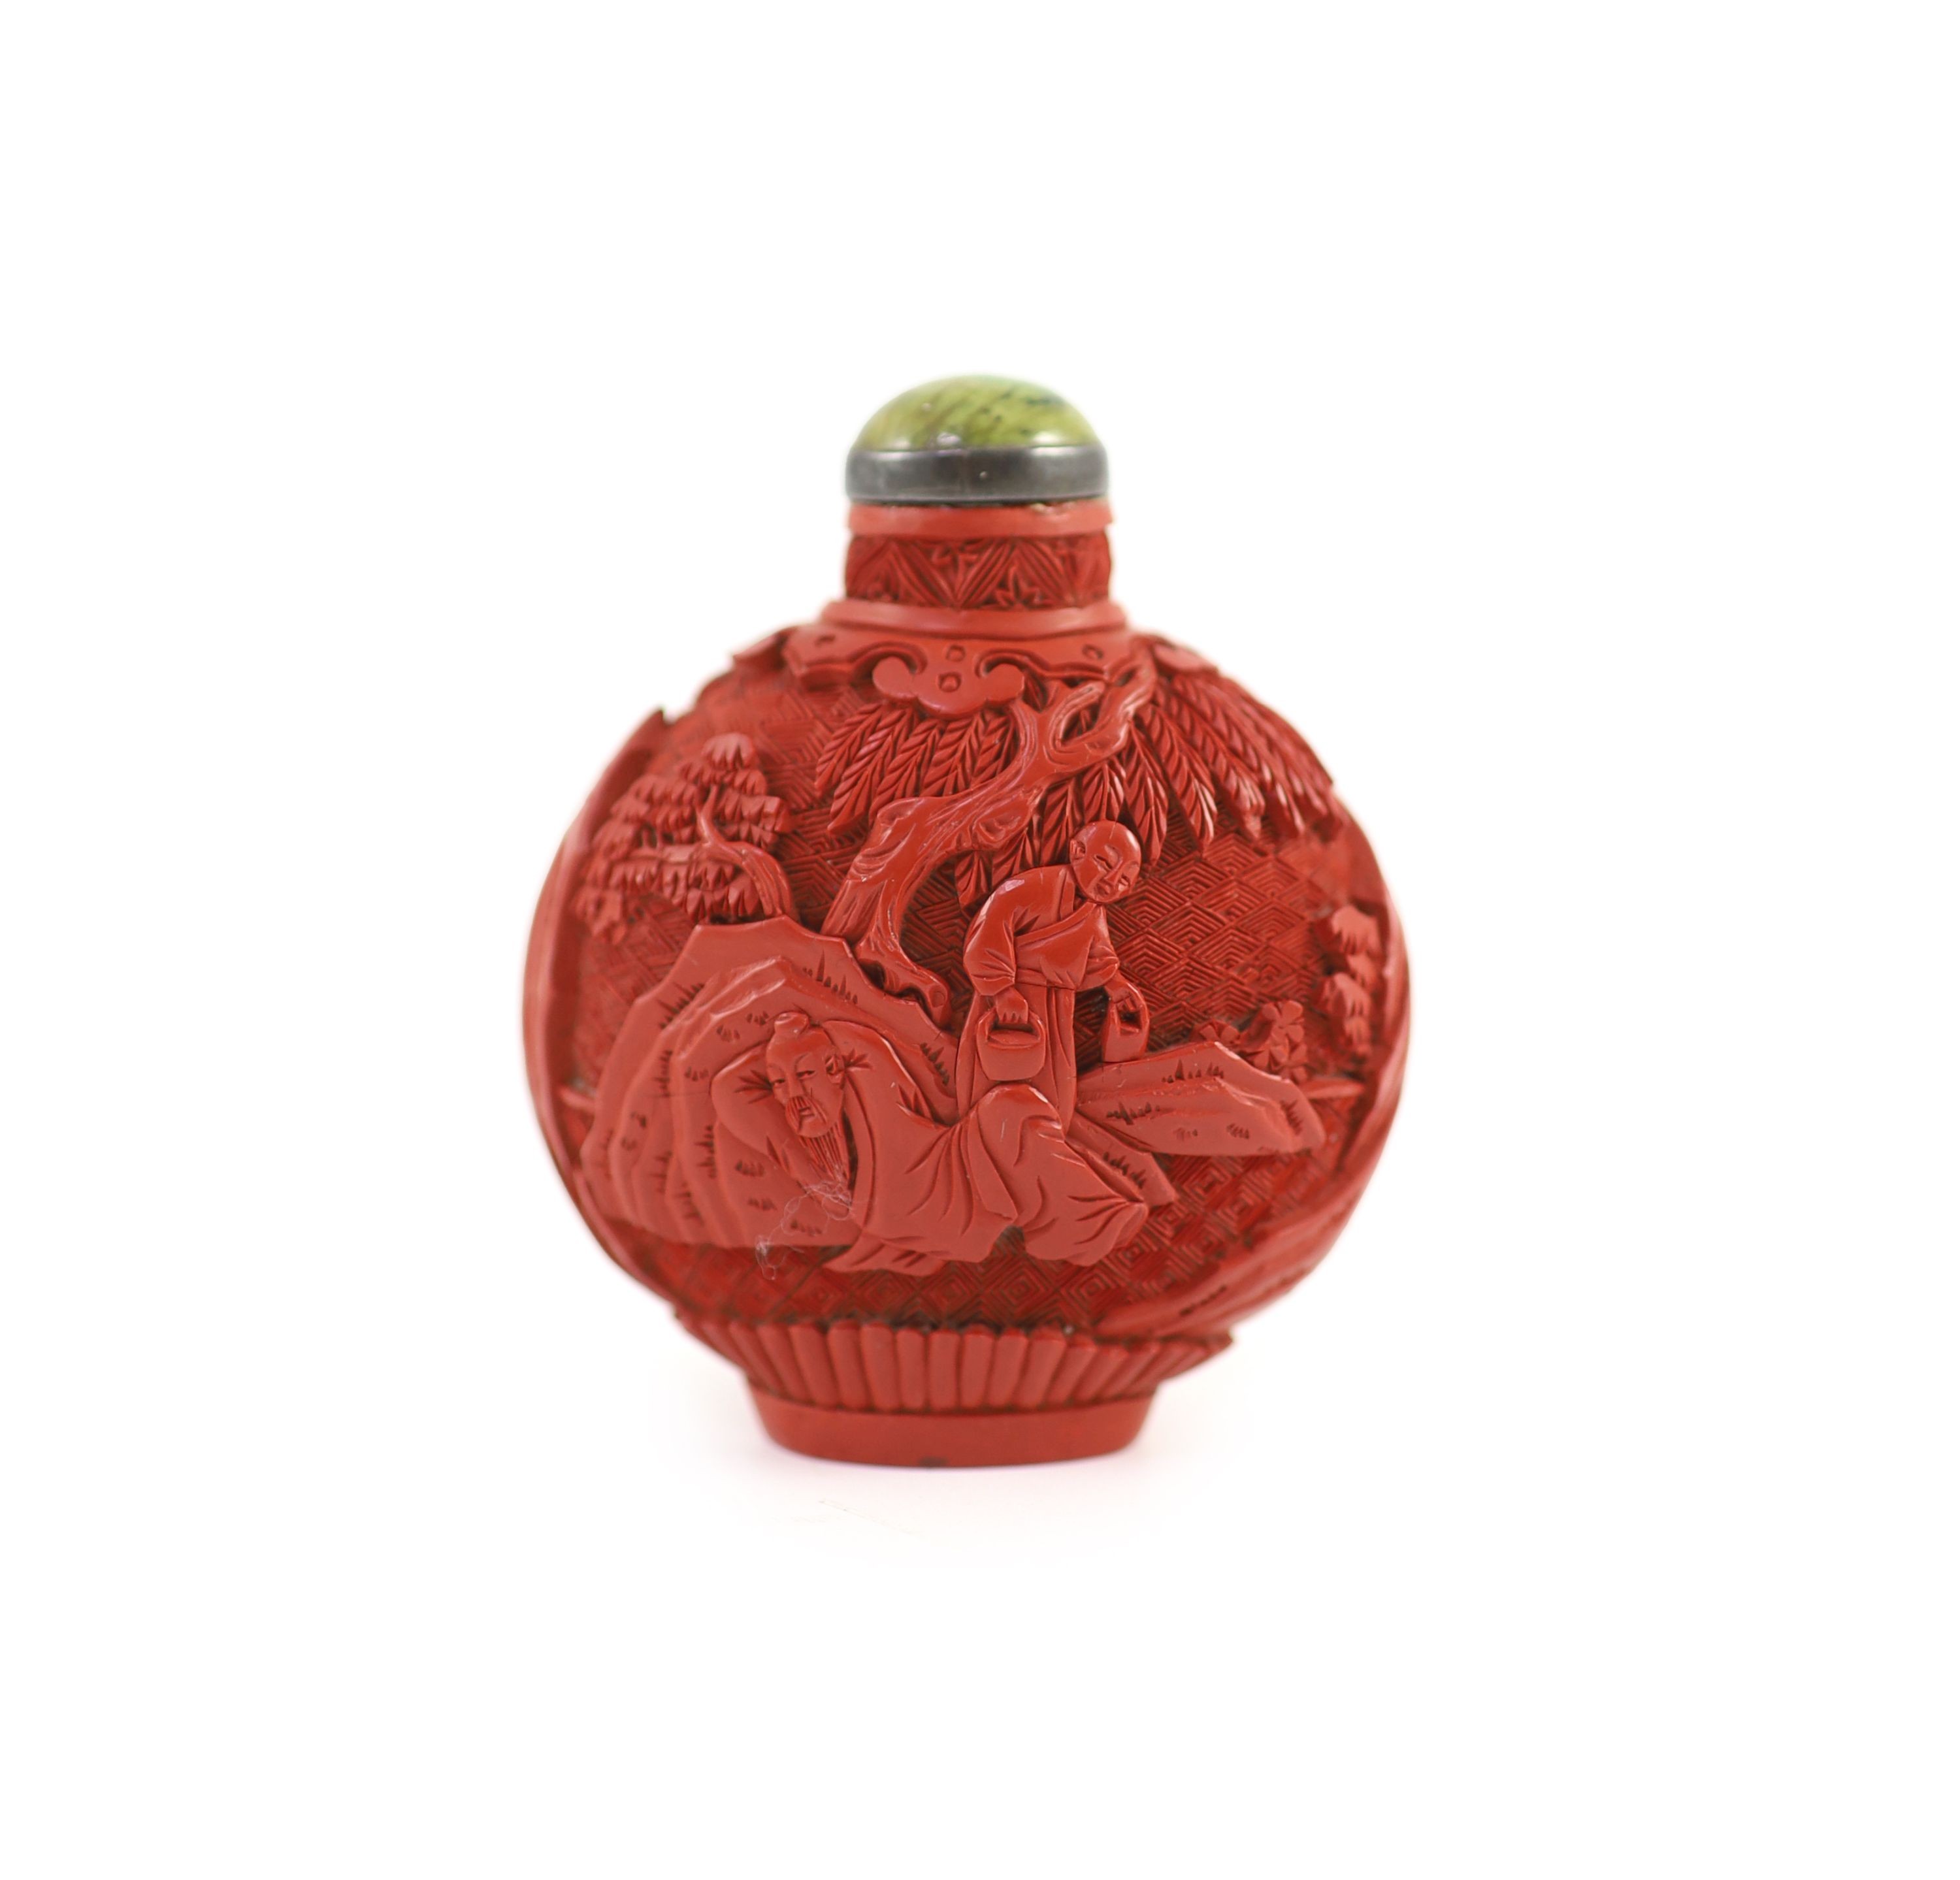 An unusual Chinese cinnabar lacquer on porcelain snuff bottle, 18th/19th century 6.2 cm high excluding stopper